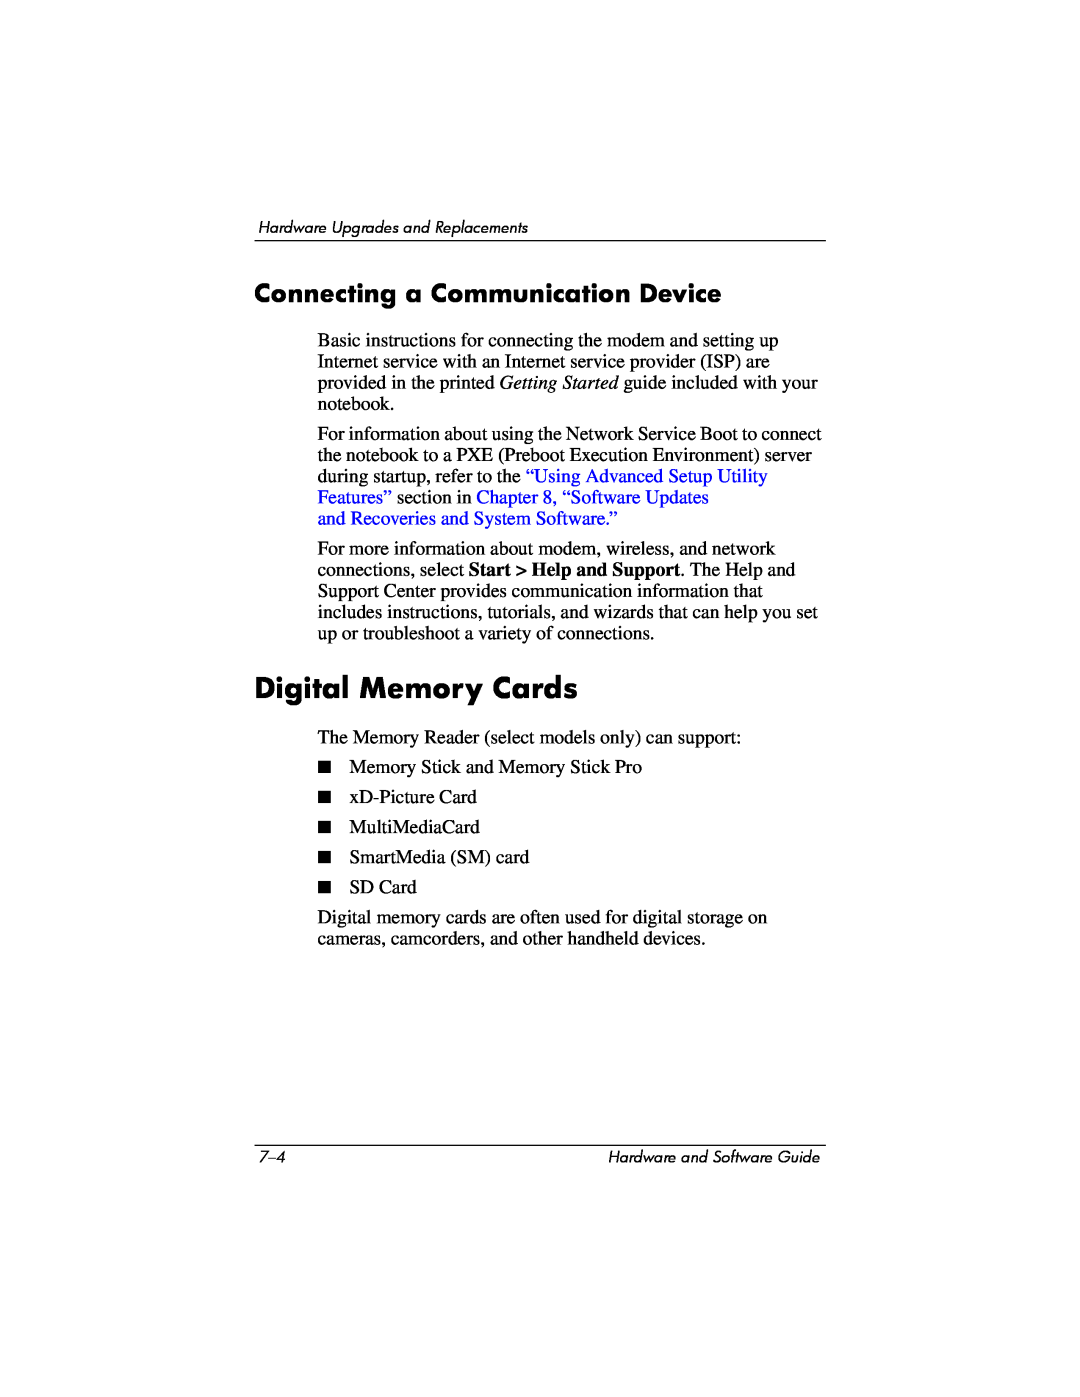 Compaq Presario M2000 manual Digital Memory Cards, Connecting a Communication Device, and Recoveries and System Software.” 